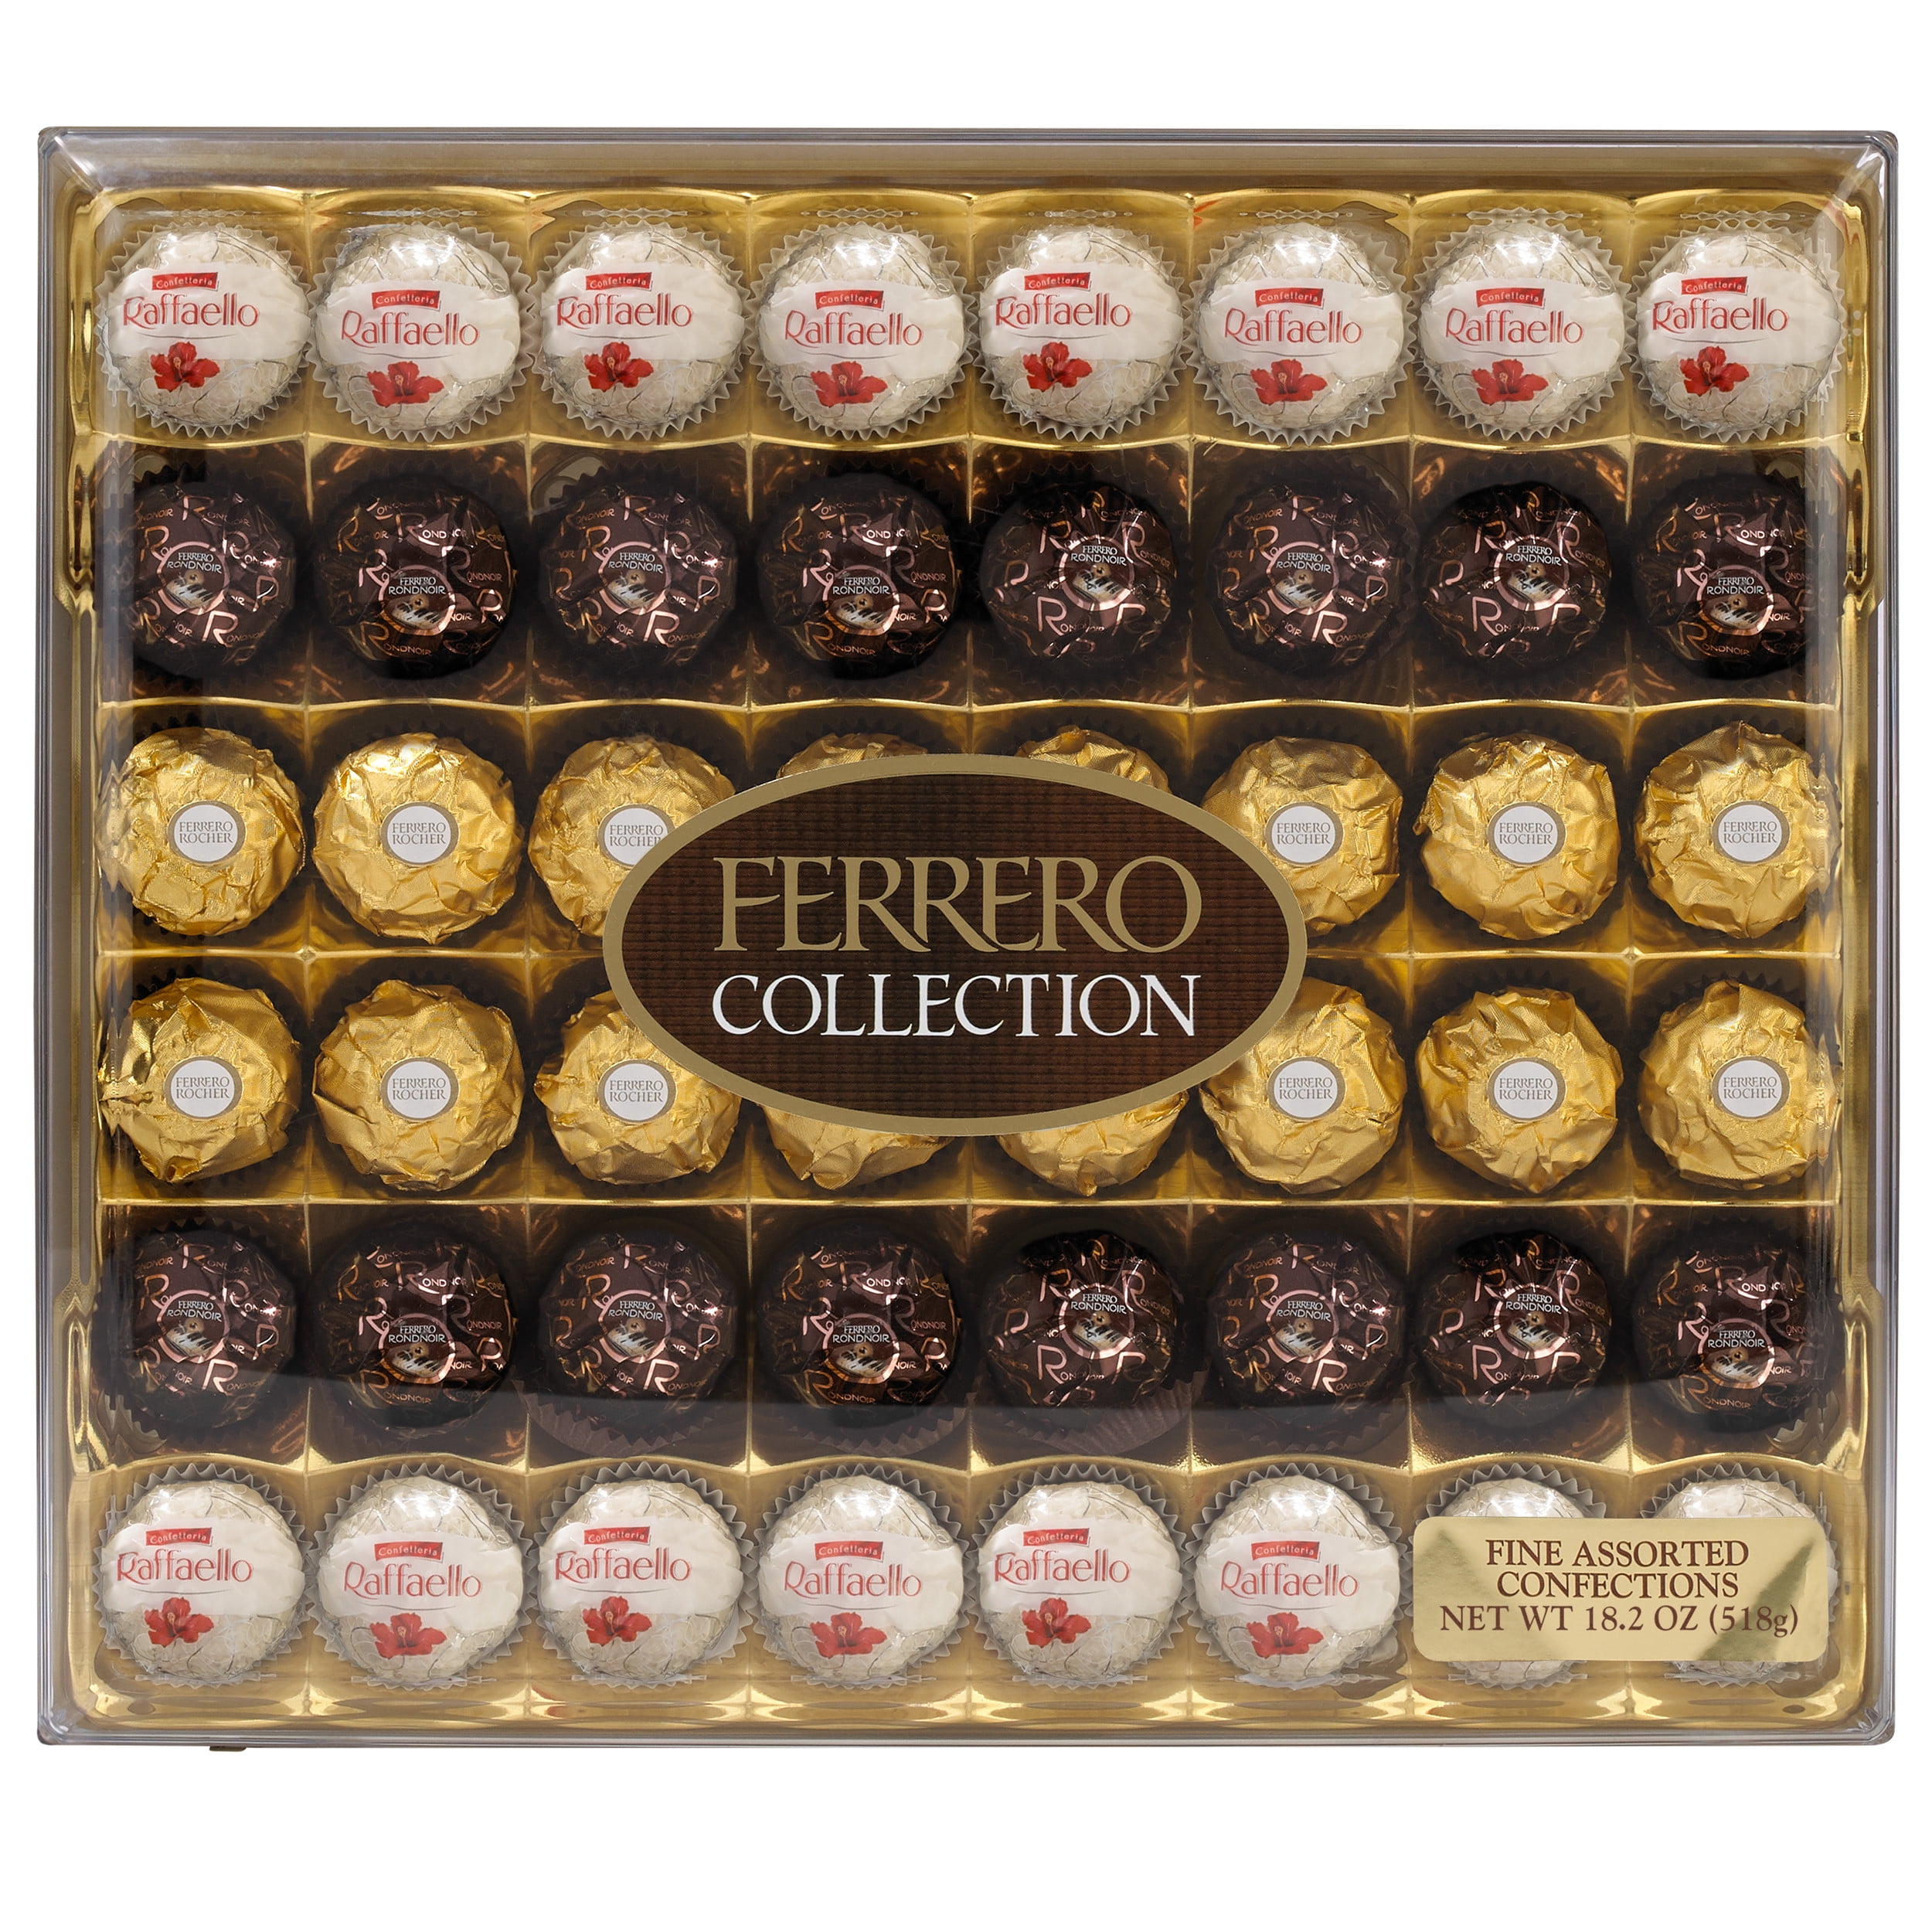 Collection oz Hazelnut Great Coconut, Chocolate, Count) Easter Ferrero 18.2 48 Assorted Dark A Gourmet and Gift, Milk Chocolate Premium